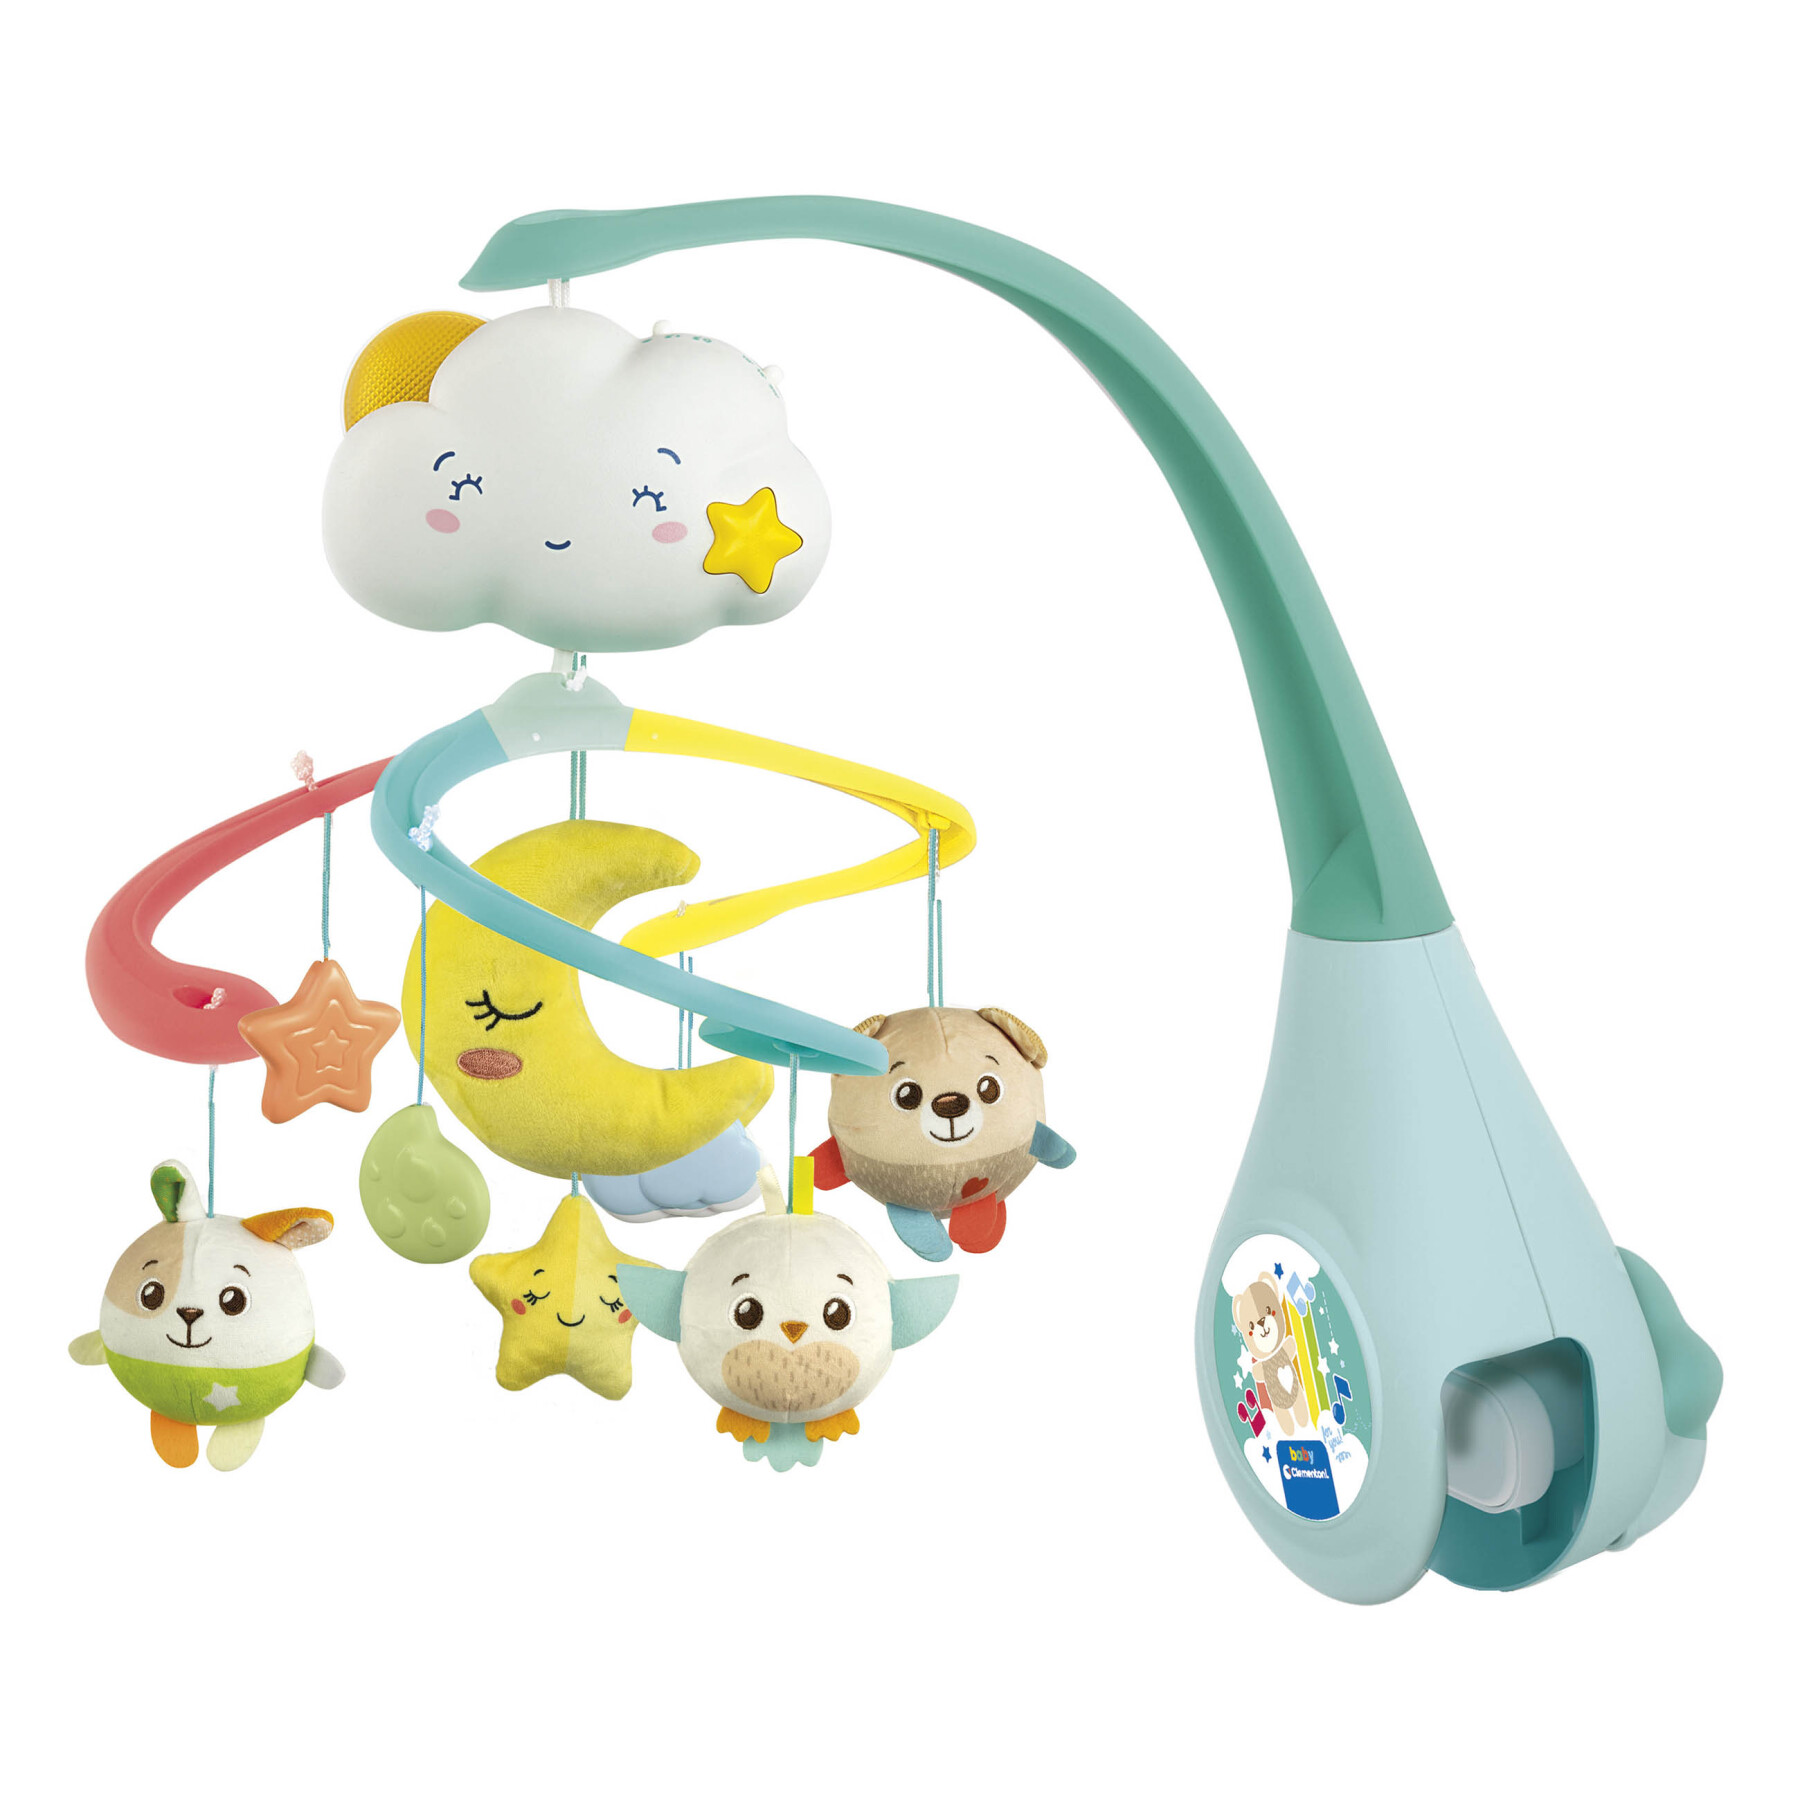 Baby clementoni - sweet and dream cot mobile, giostrina culla o lettino -  Toys Center